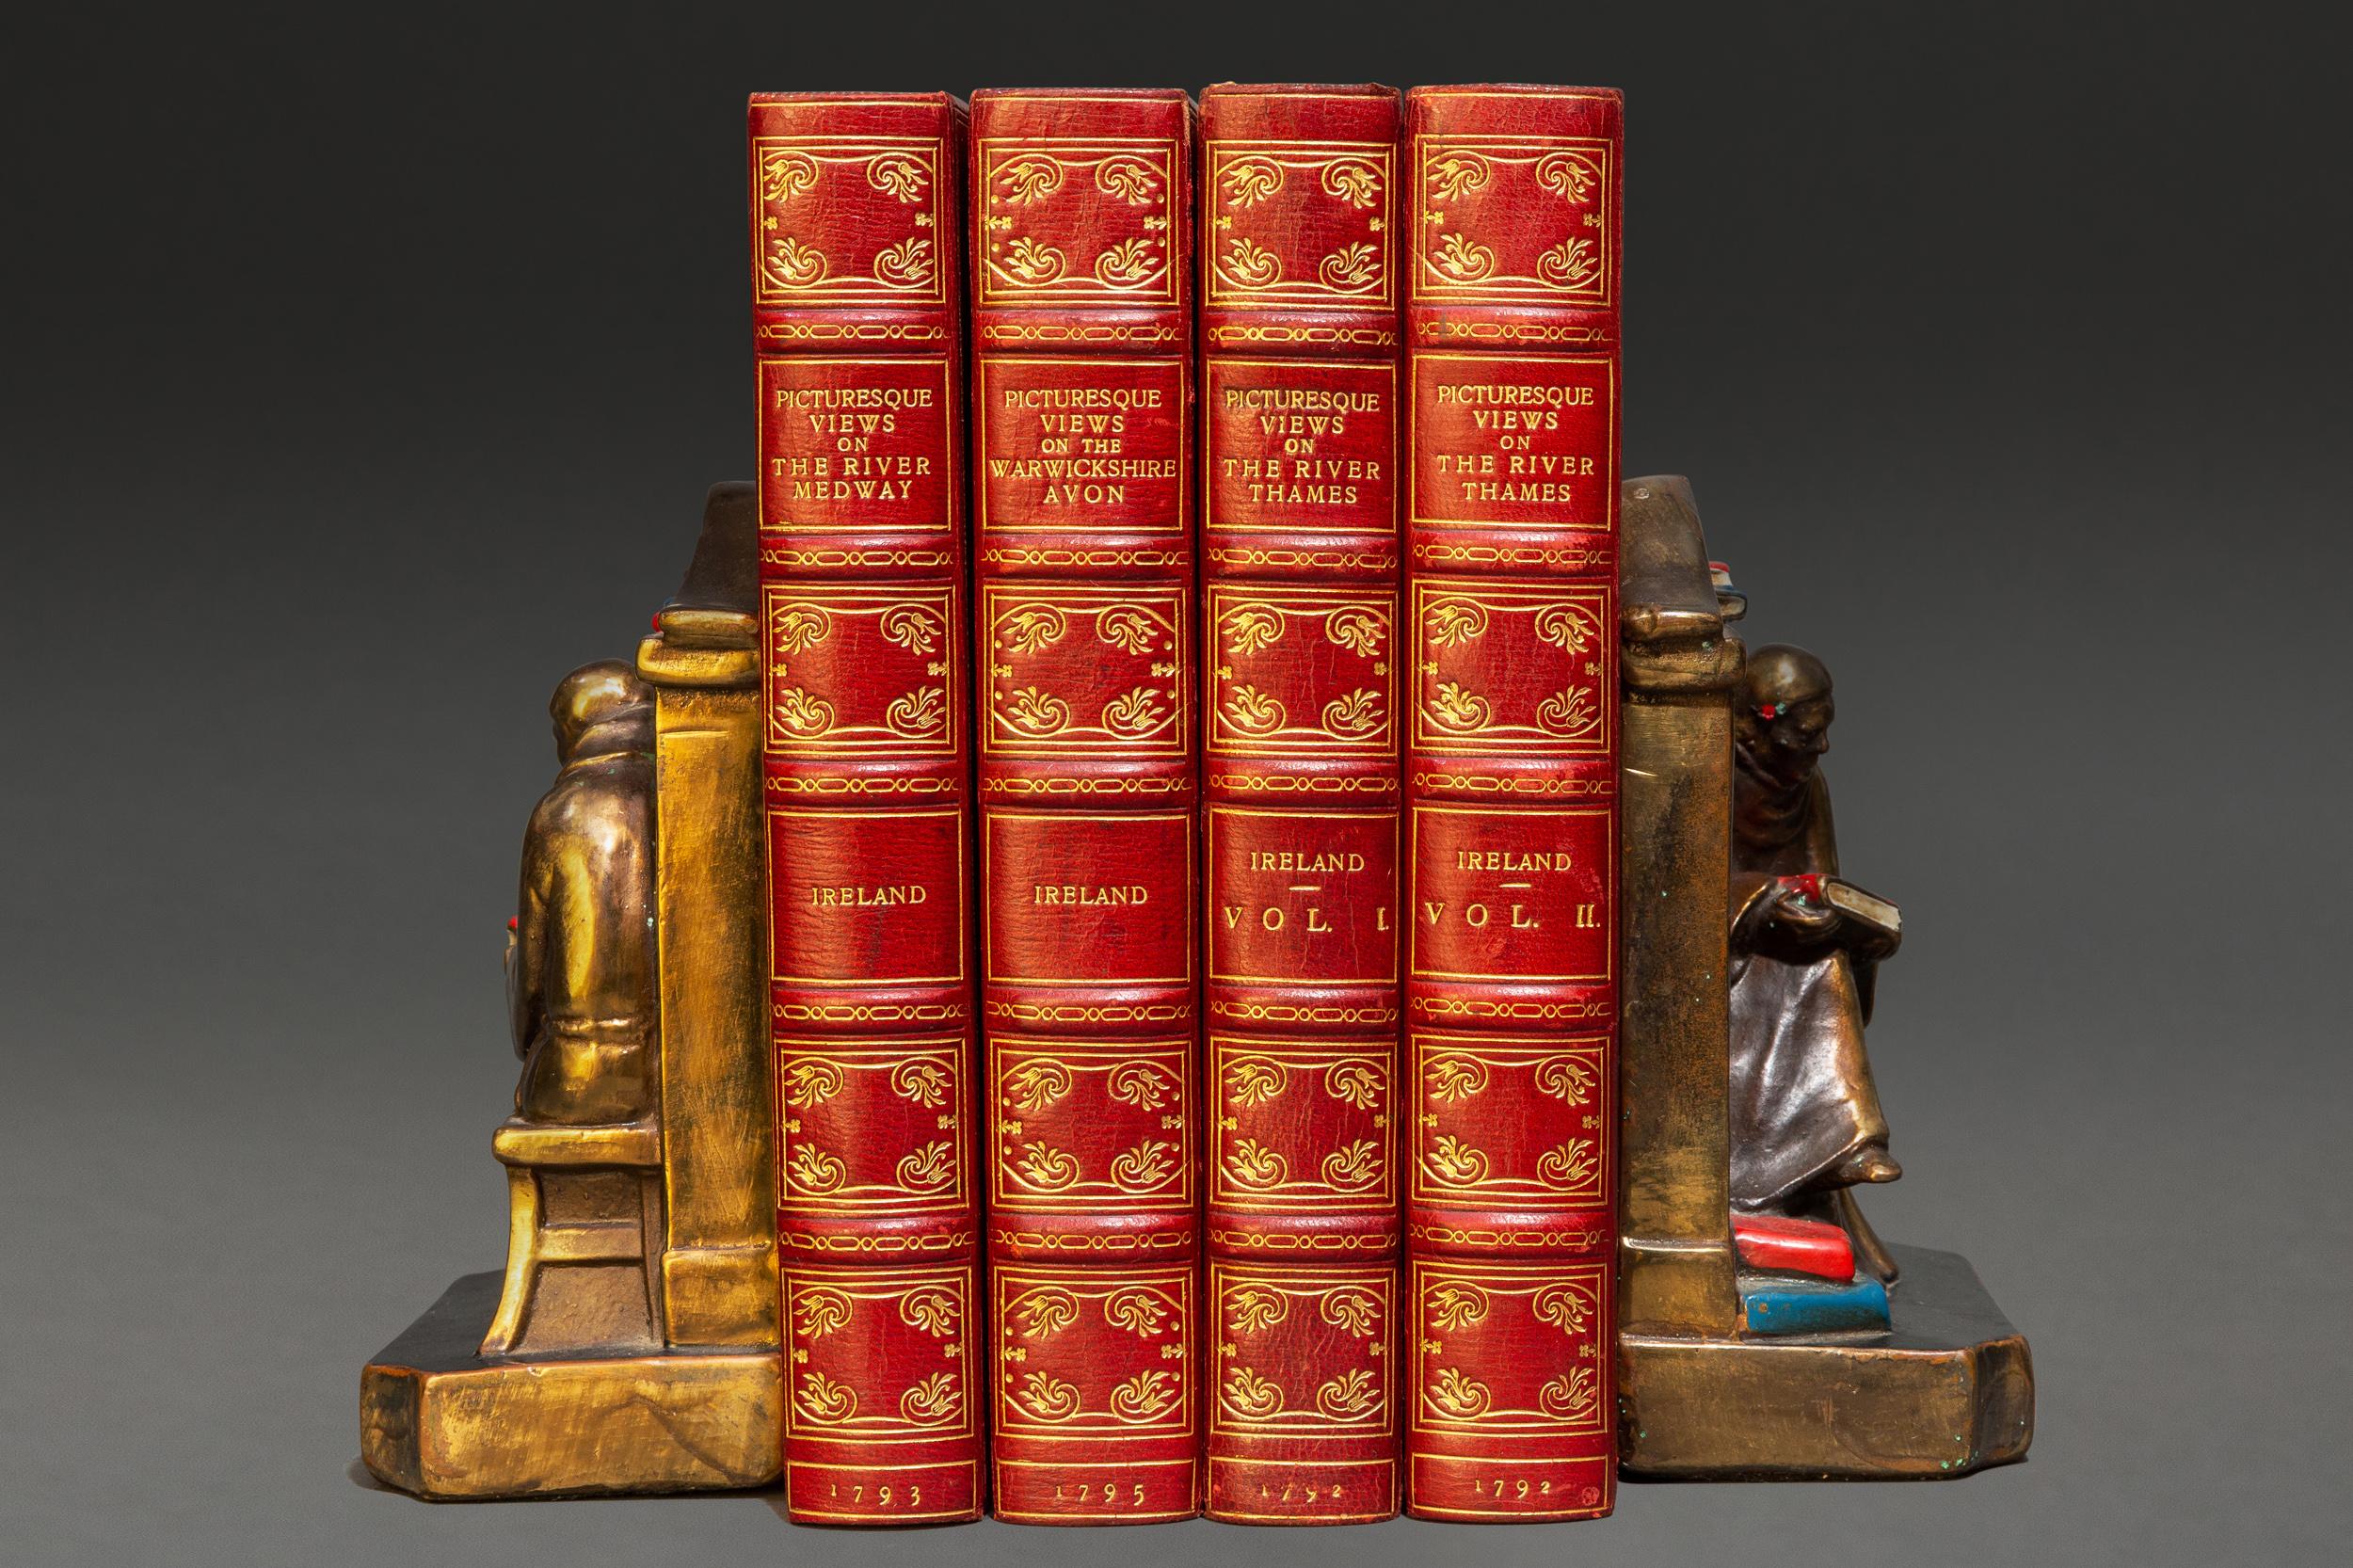 4 Volumes. Samuel Ireland. Picturesque Views on the River Thames. Bound in full red morocco, all edges gilt, raised bands, ornate gilt on covers and spines. Profusely illustrated with hand colored plates. Published: London: T. & J. Egerton 1792.